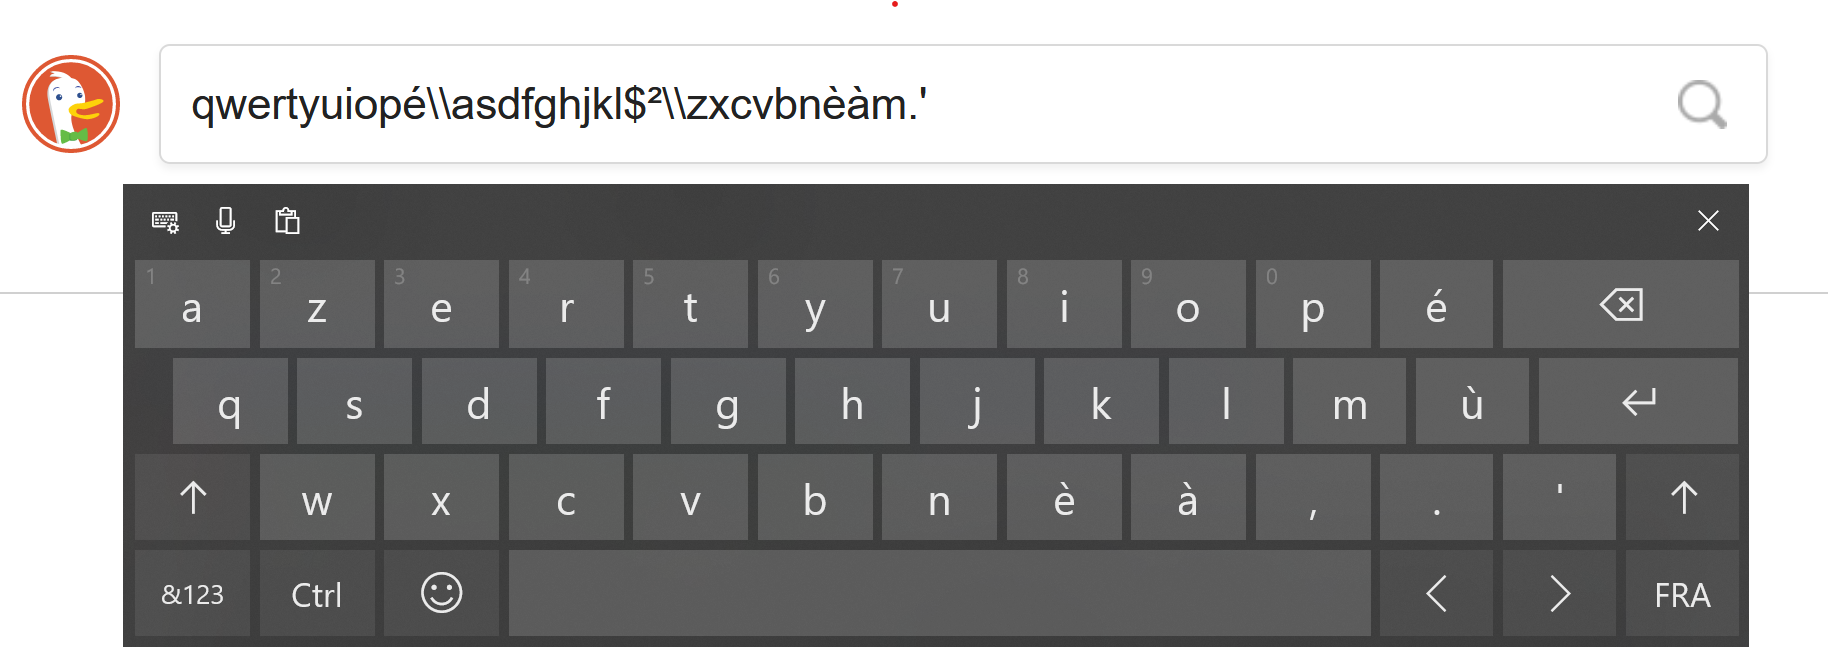 French keyboard's layout is not working right in tablet mode ef3f3d35-62e2-4949-8b6f-9c224994f093?upload=true.png